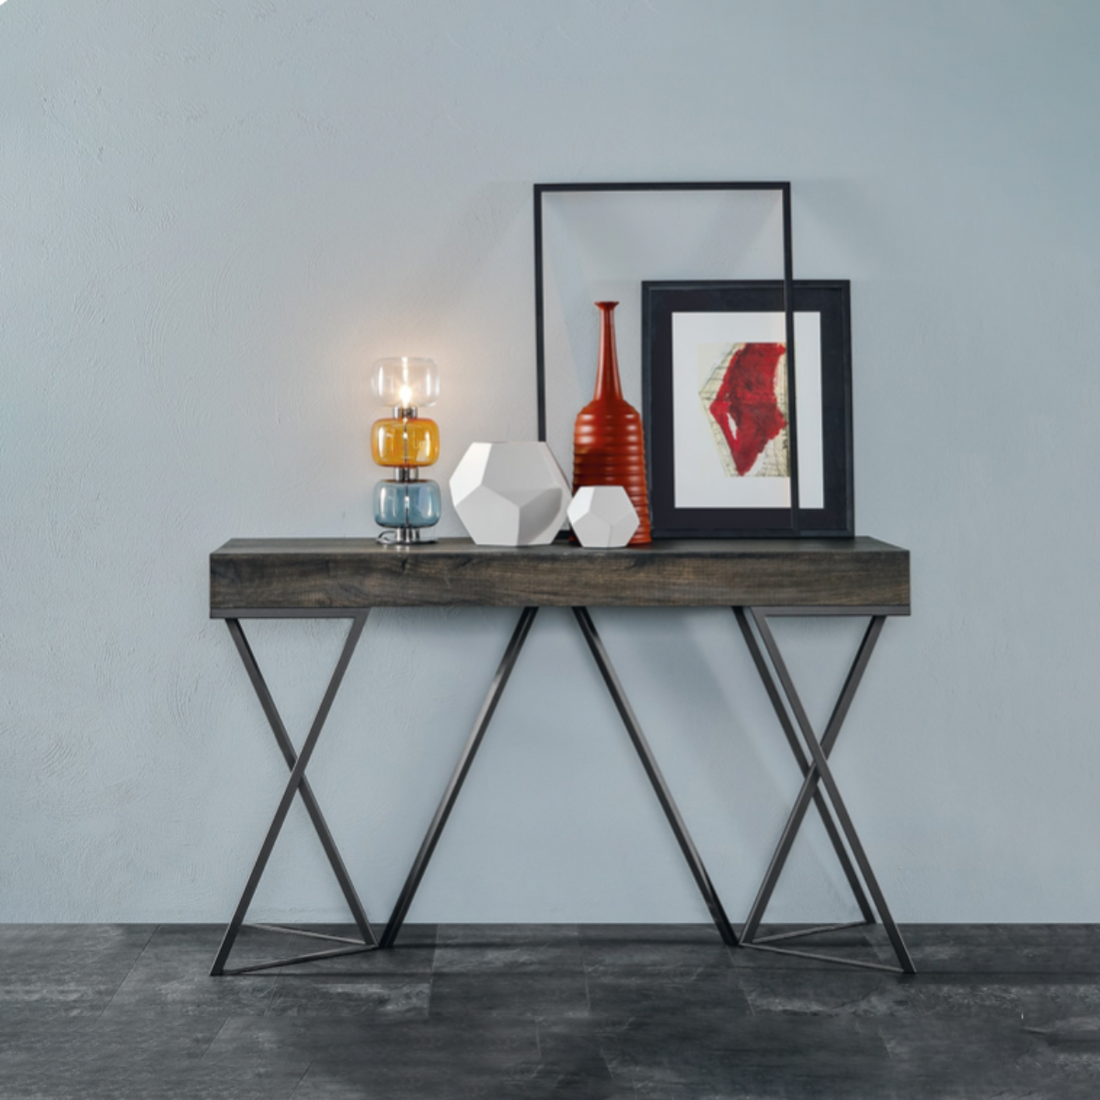 5 Clever Ways to Use a Console Table Around Home